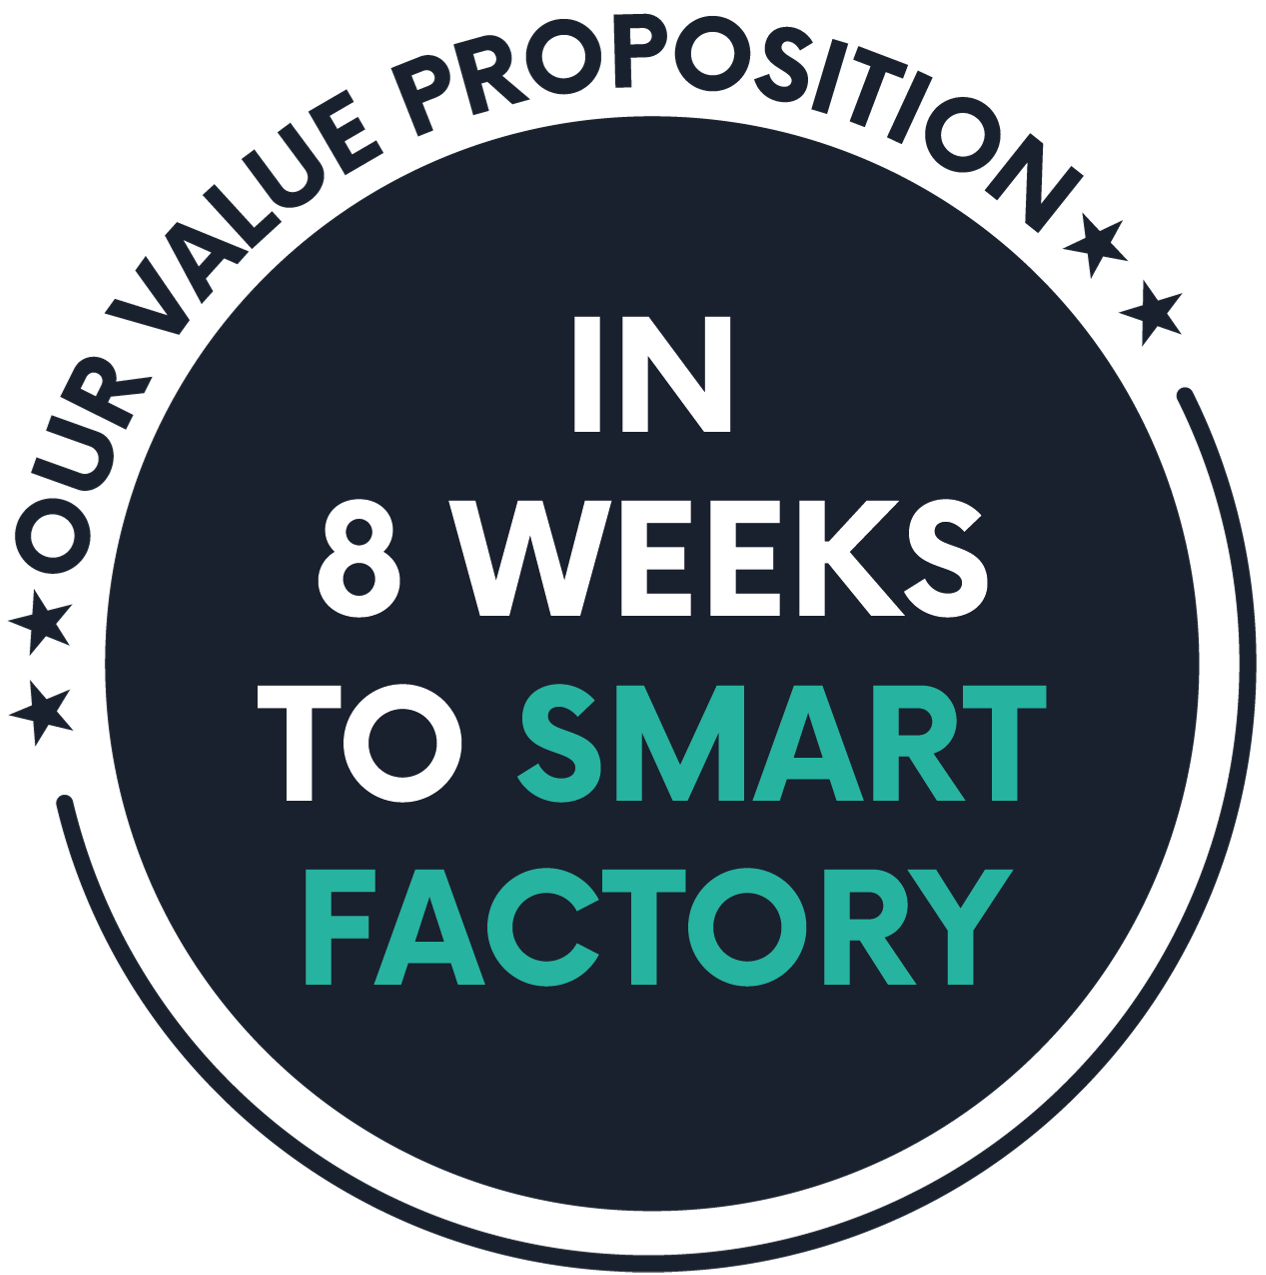 8 week value proposition by Scable